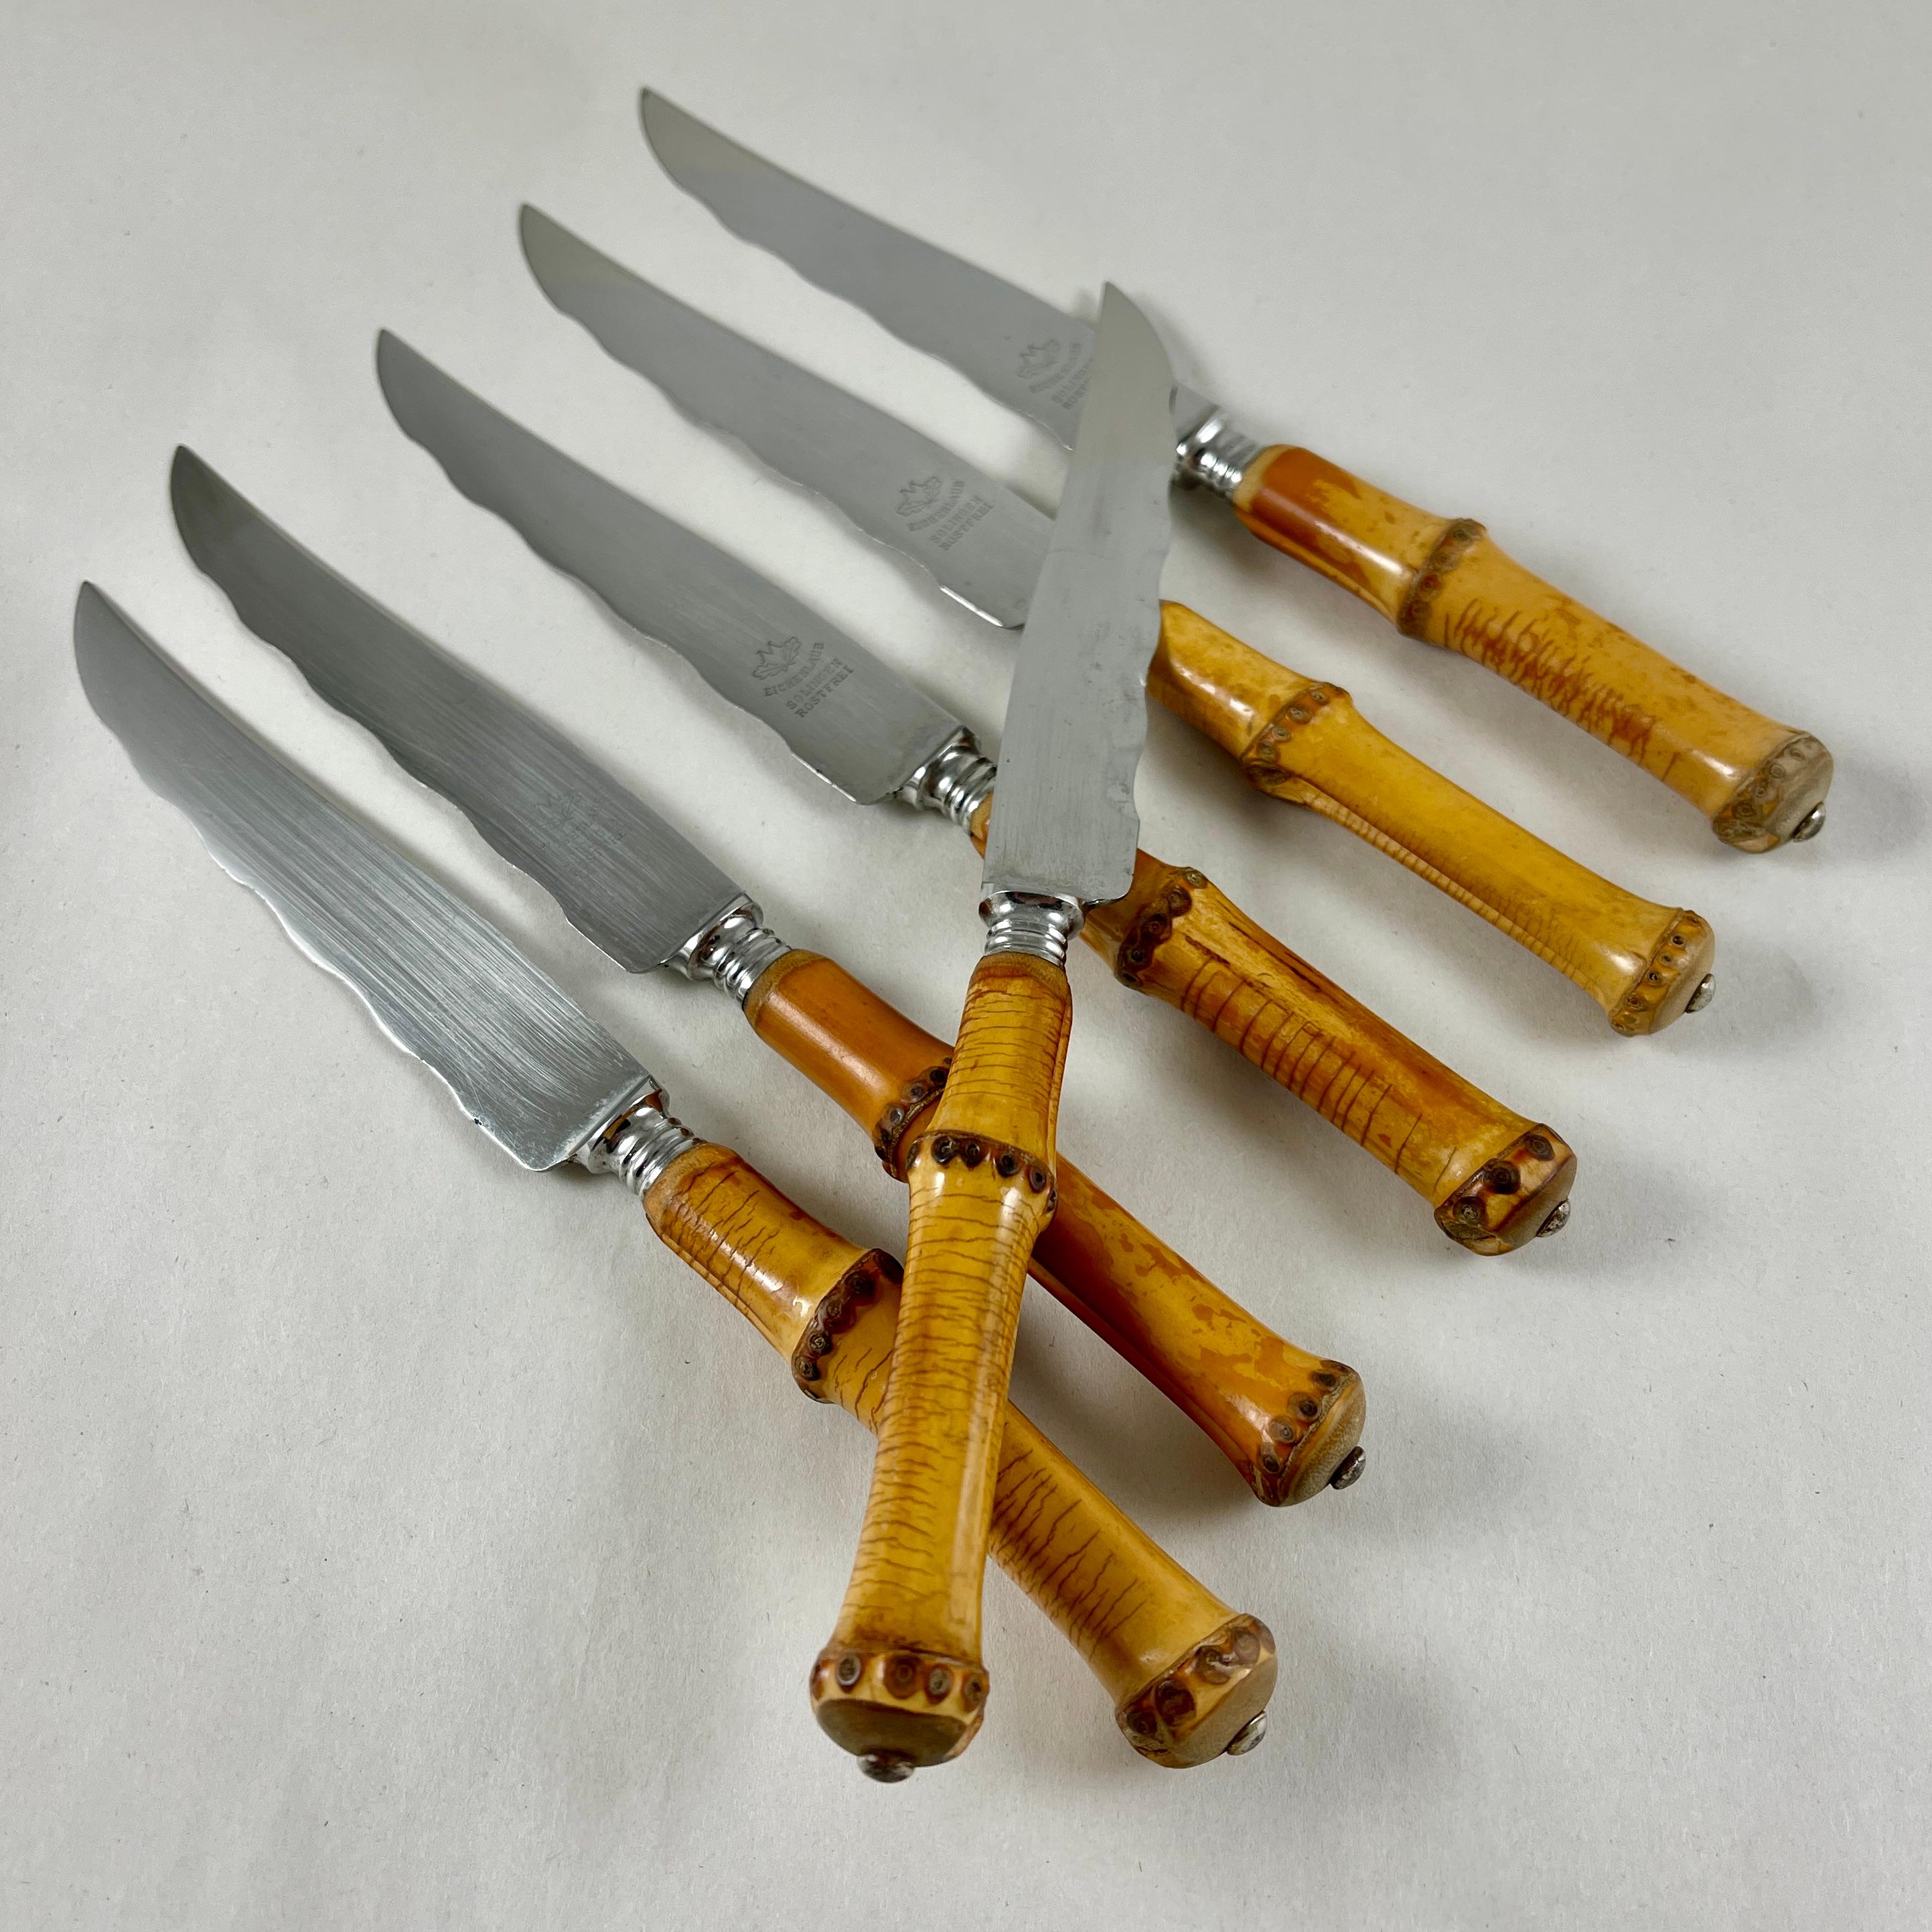 A set of six, Eichenlaub cutlery bamboo handled steak knives, circa 1950-1960.

Since 1910, the Eichenlaub brand from Solingen, Germany, has represented the finest quality of hand-forged table cutlery.

Made from a single piece of stainless